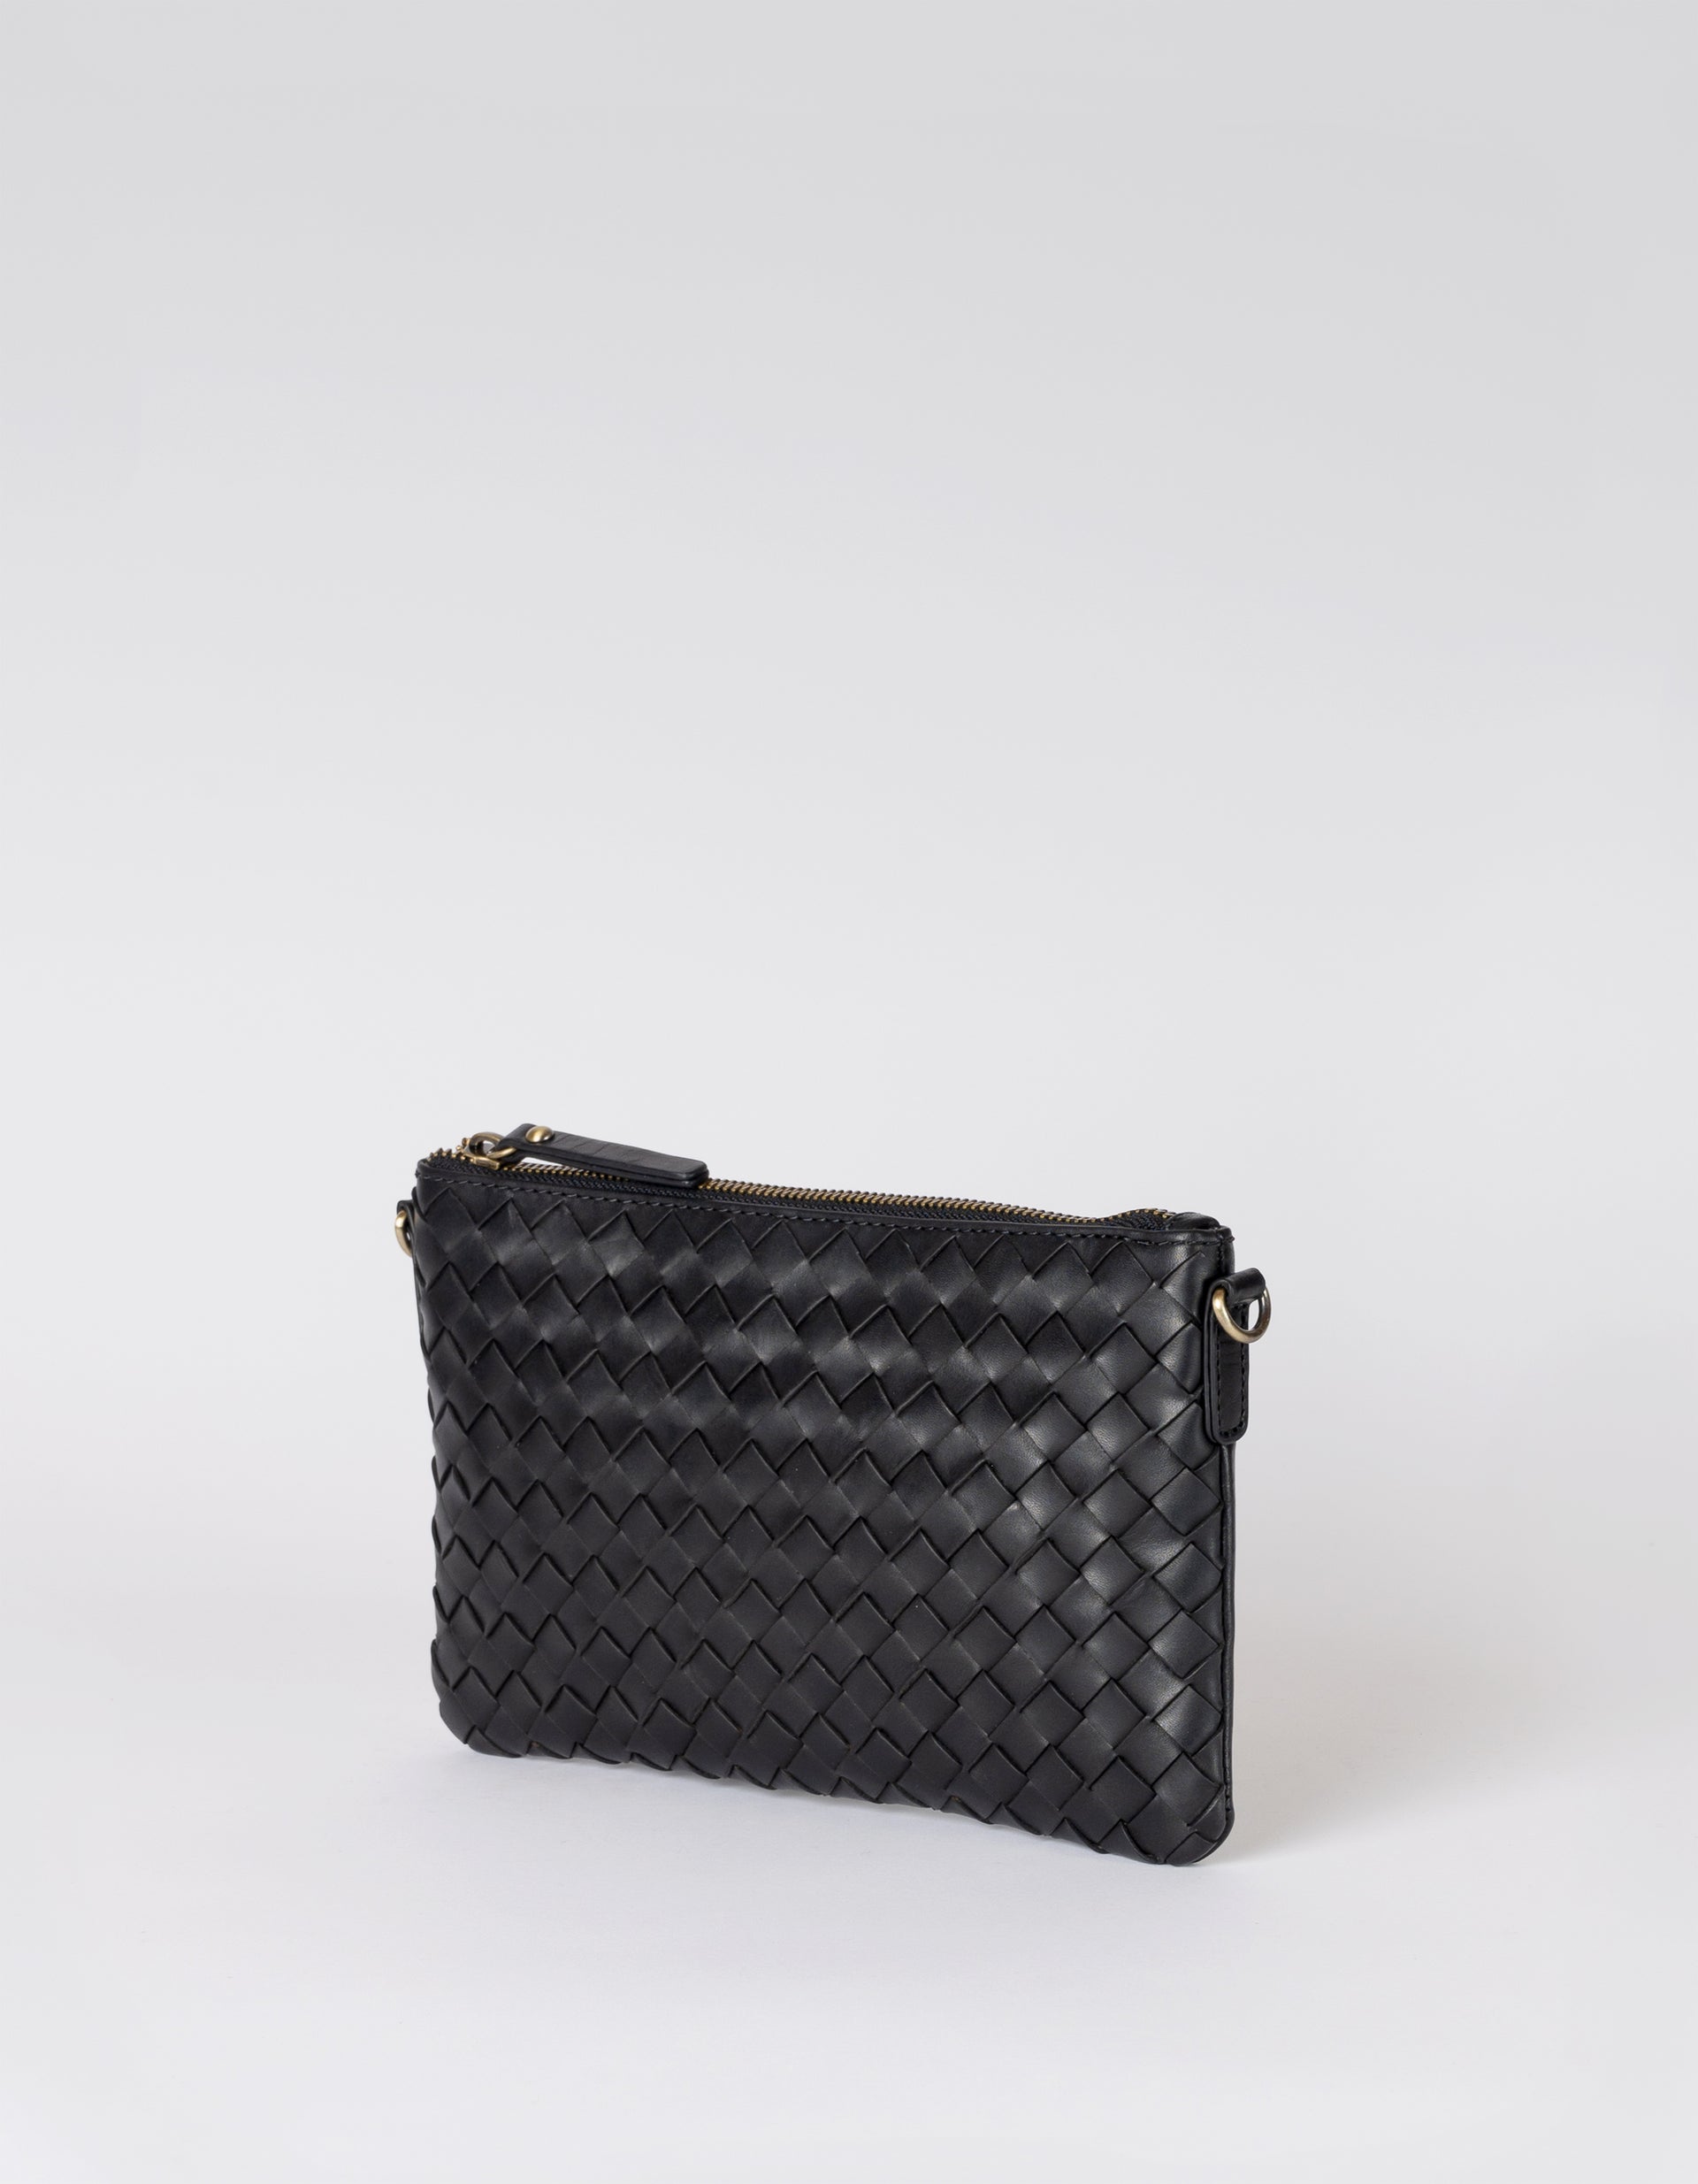 Lexi bag in black woven classic leather, side image